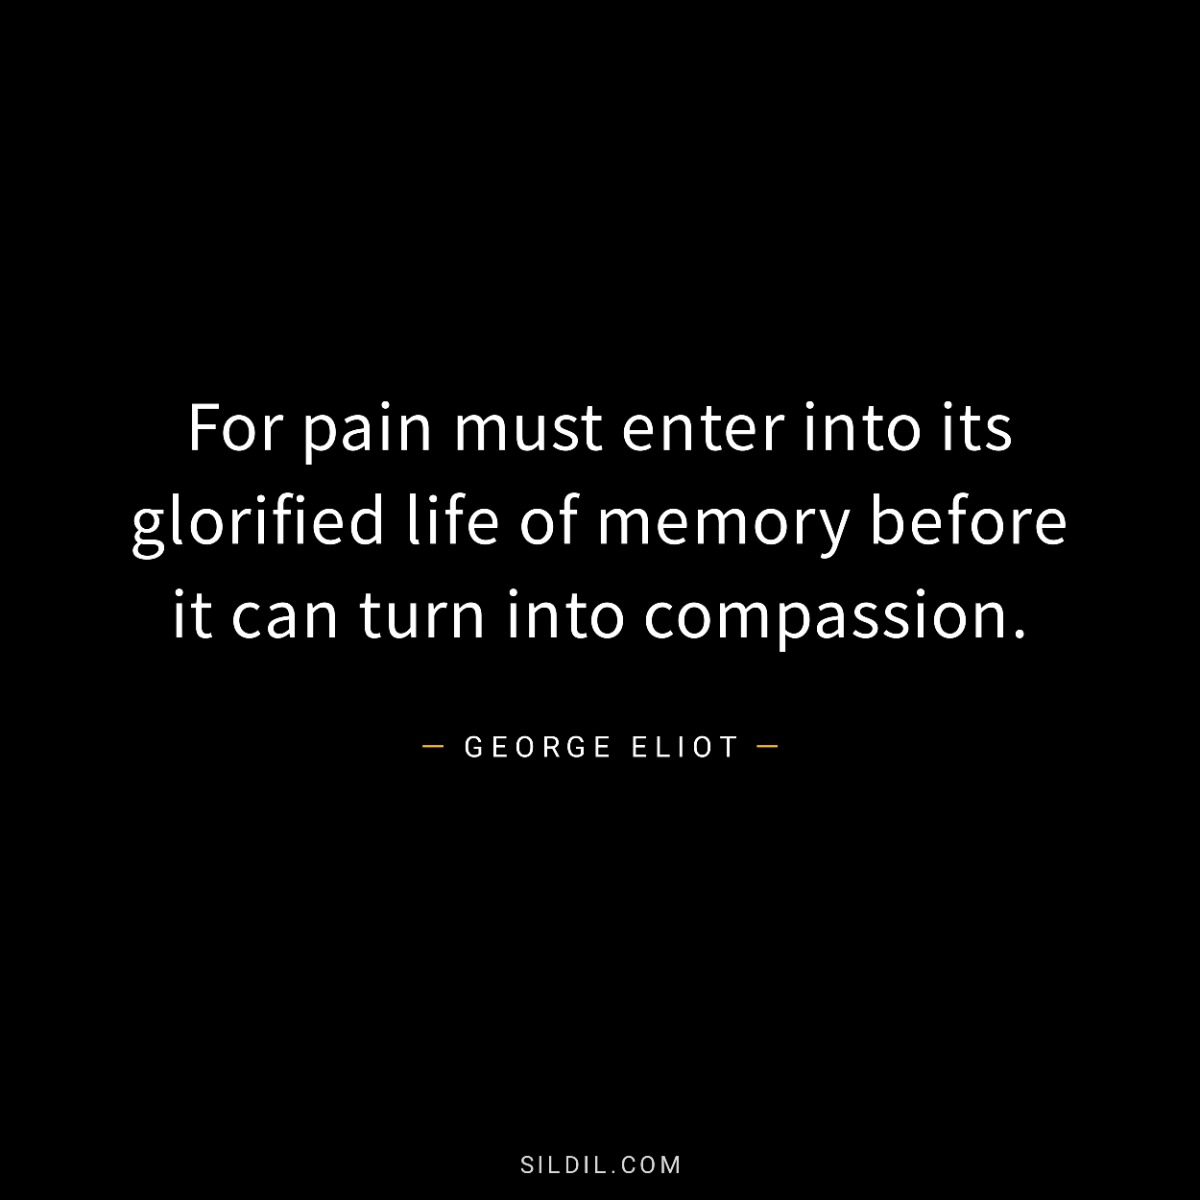 For pain must enter into its glorified life of memory before it can turn into compassion.